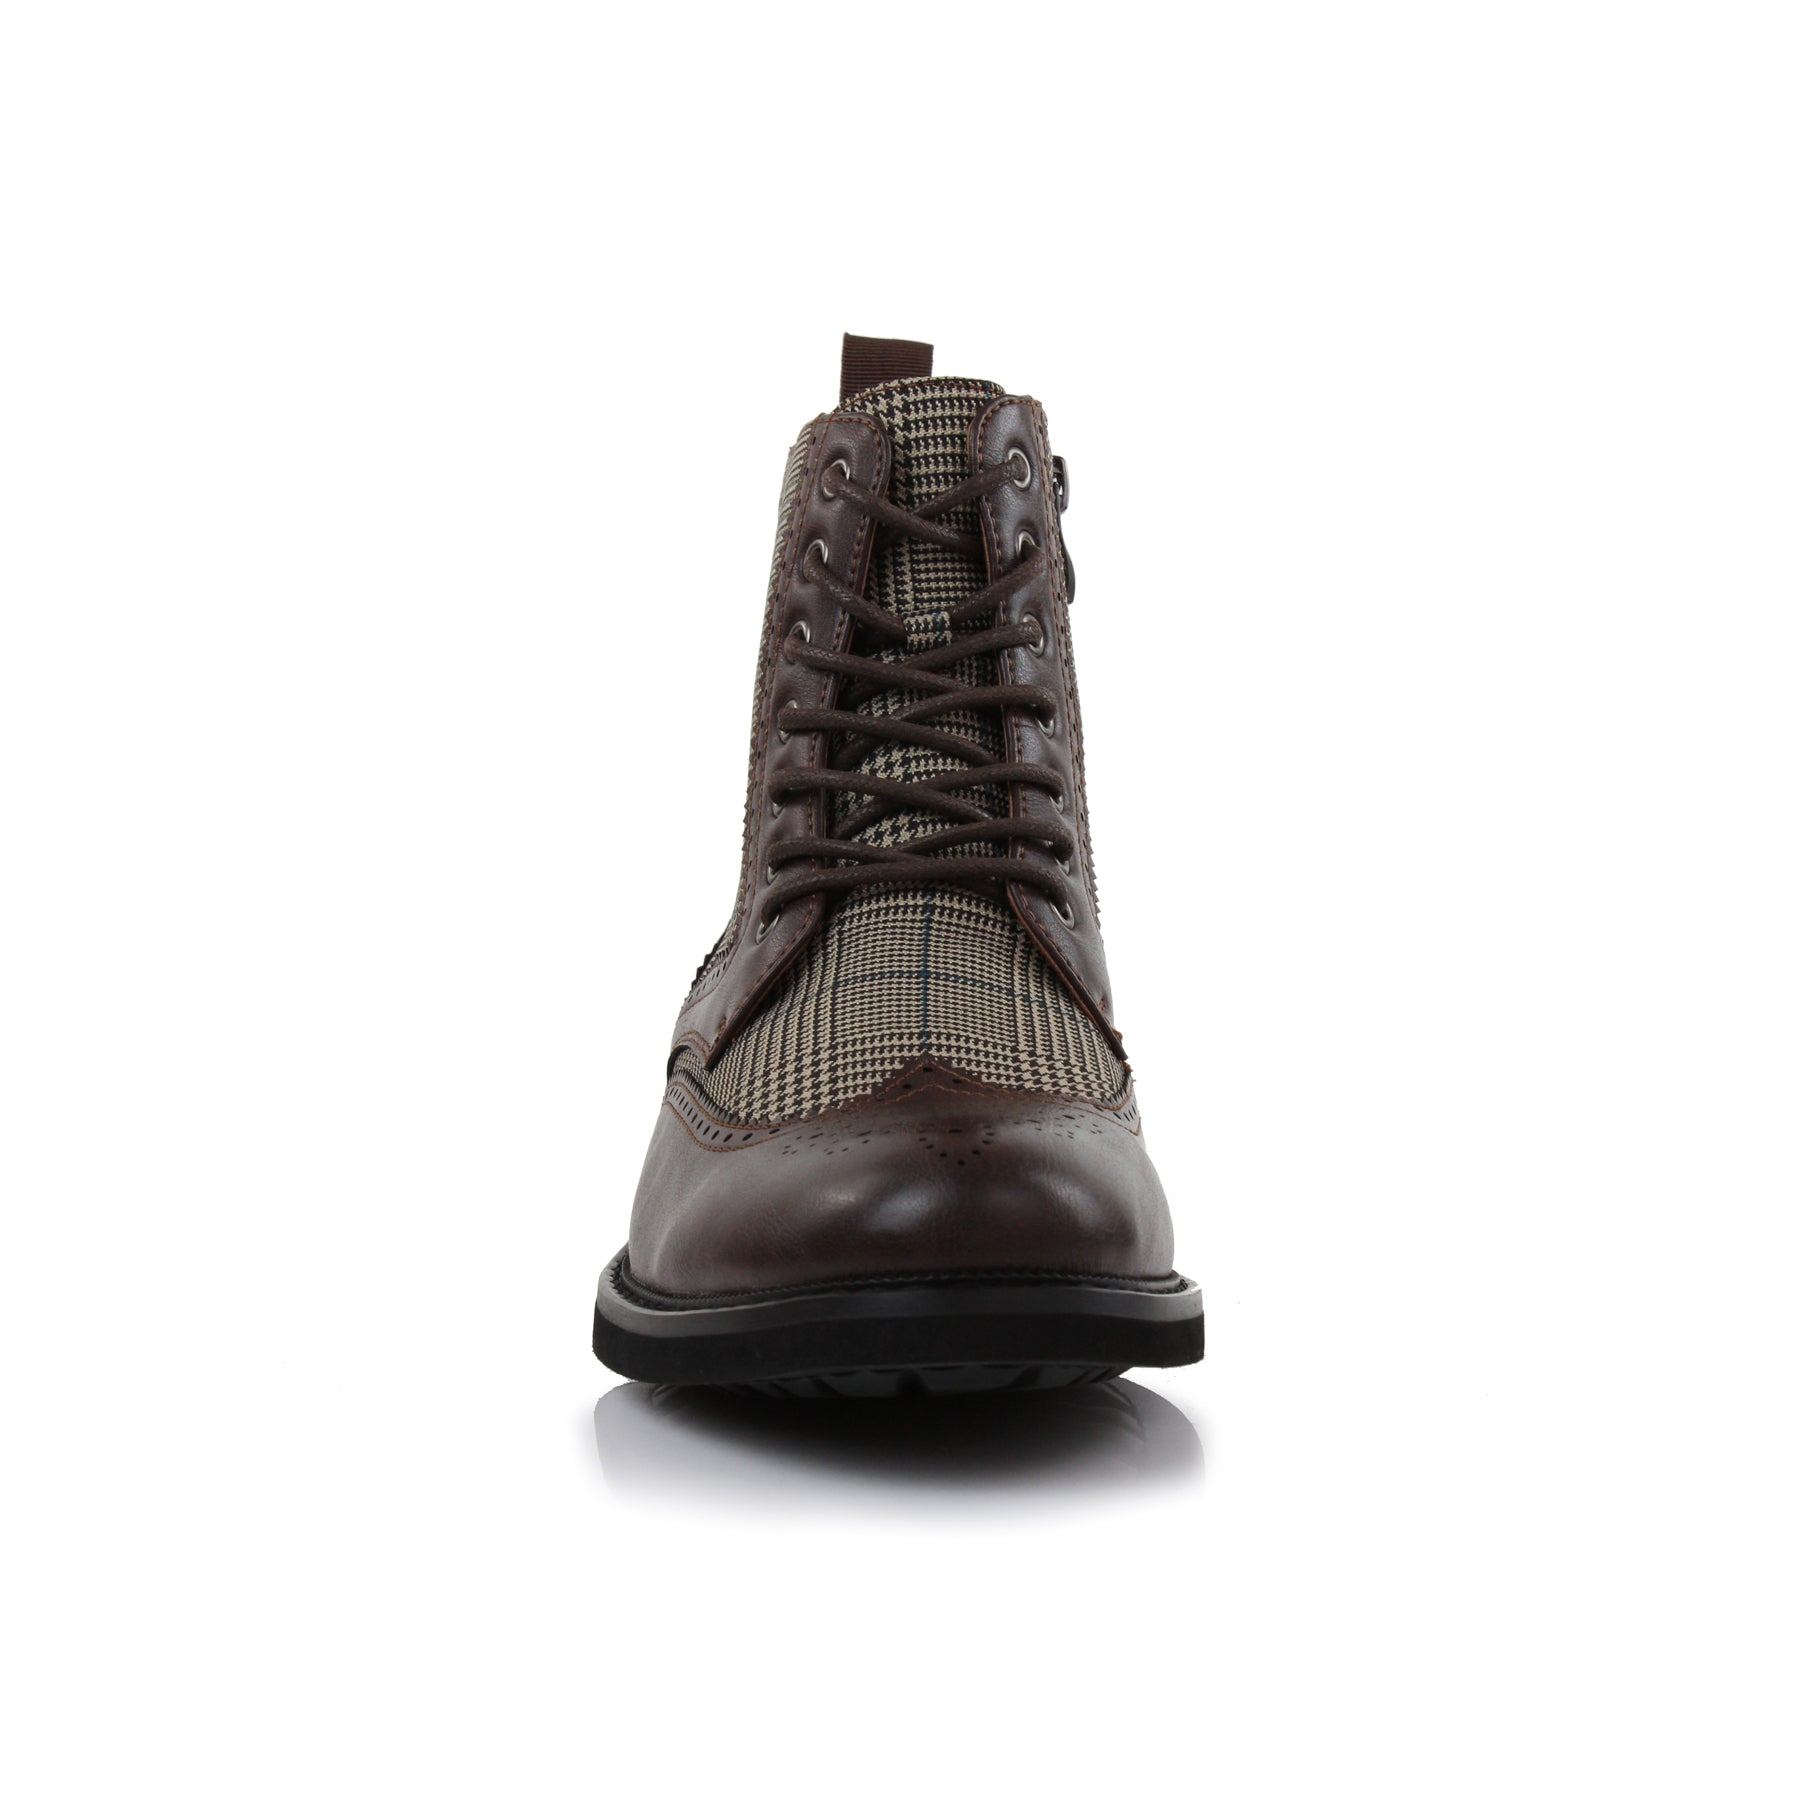 Plaid Brogue Wingtip Boots | Manchester by Polar Fox | Conal Footwear | Front Angle View